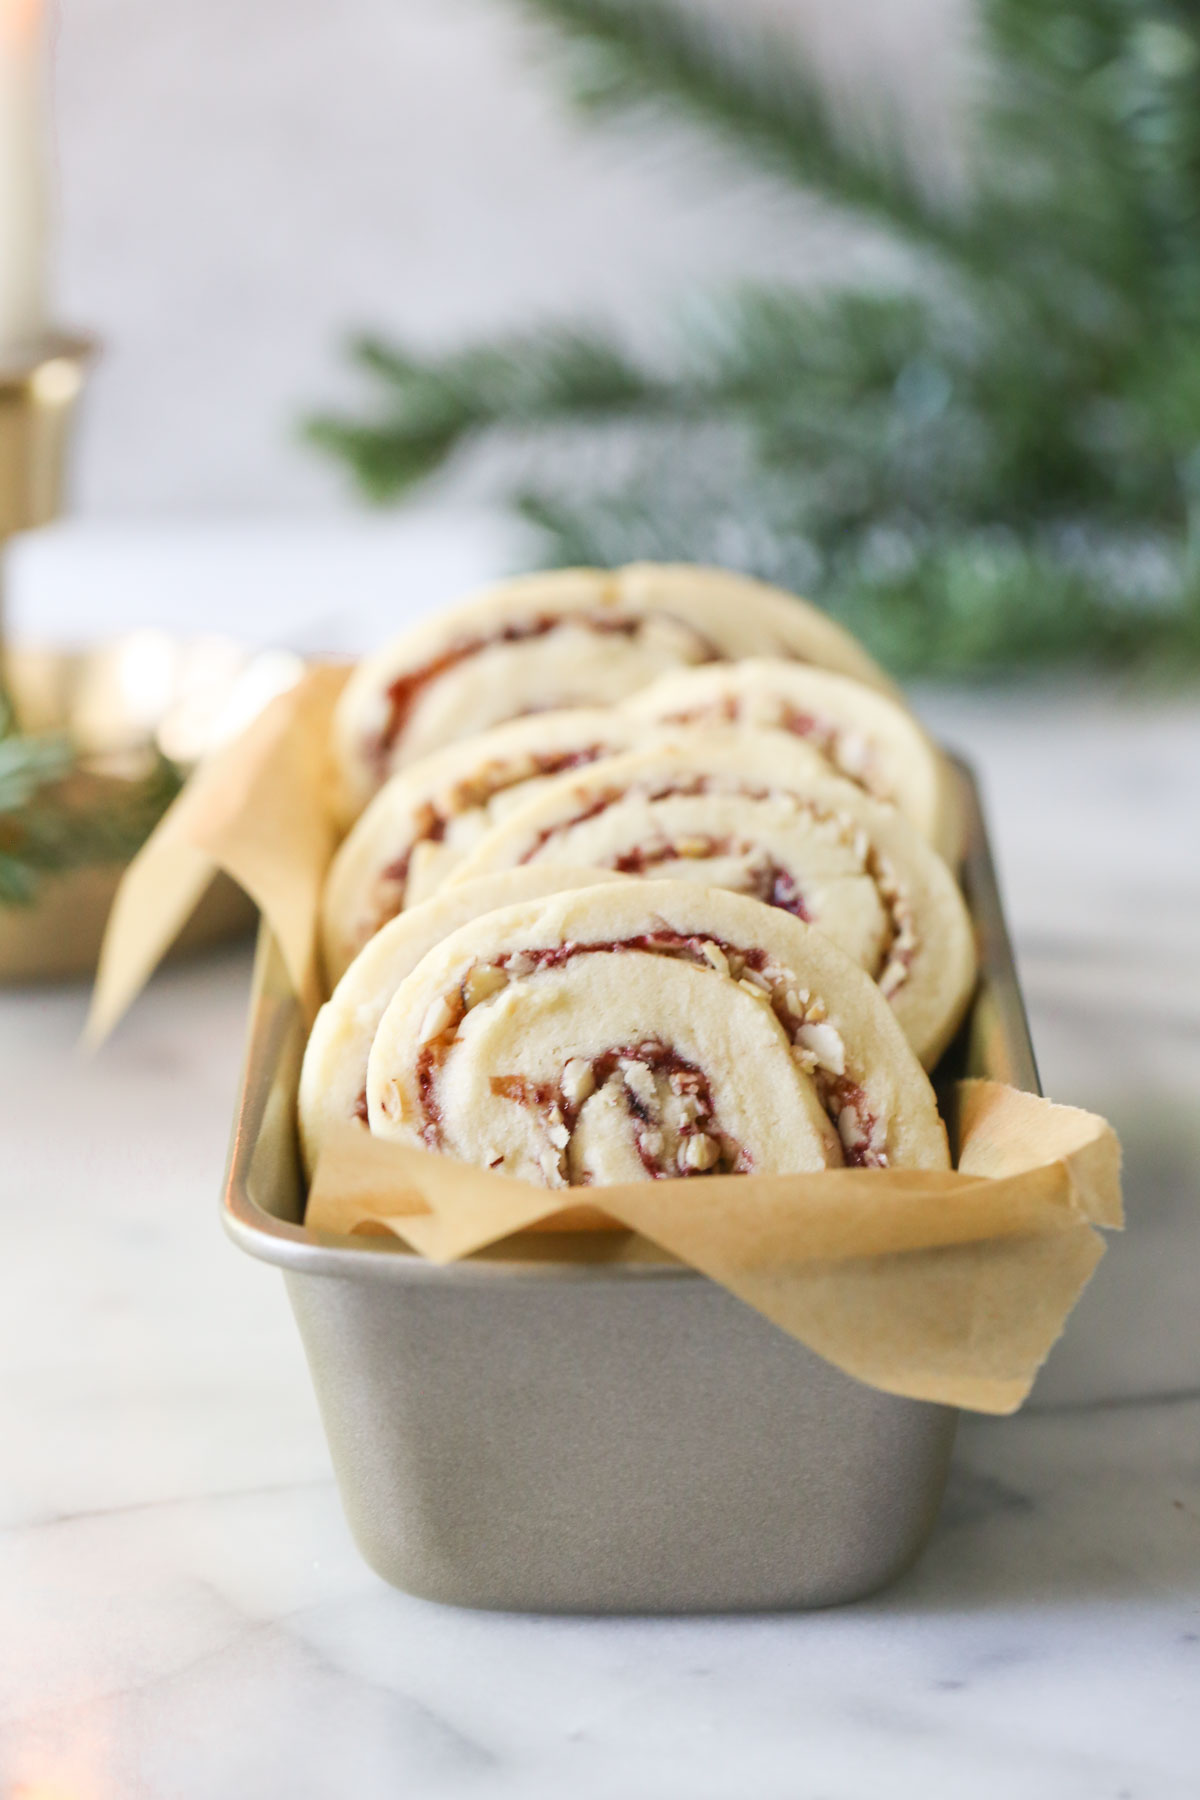 Raspberry Almond Pinwheels arranged in a parchment paper lined mini loaf pan, with a candle and greenery in the background.  